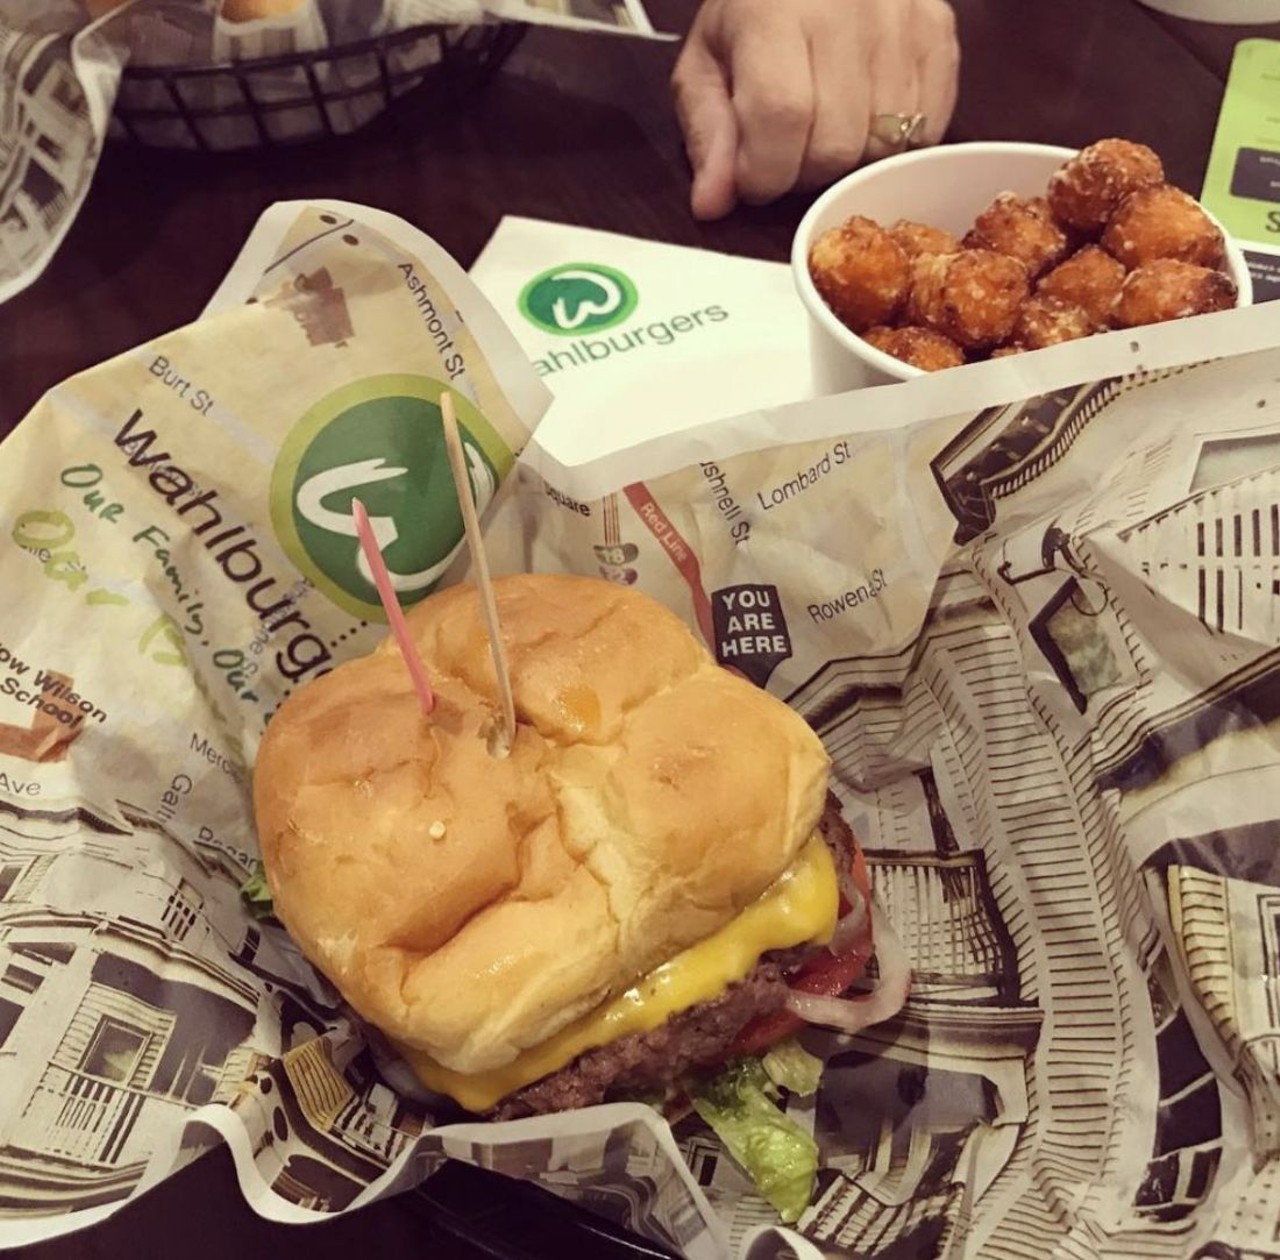 Wahlburgers
569 Monroe Ave, Detroit, MI 48226
The &#147;smahlburgs&#148; menu consists of all of your little ones favorites &#150; grilled cheese, chicken tenders, and a &#147;smahlburger.&#148;
Photo courtesy of @nicoleantoinette